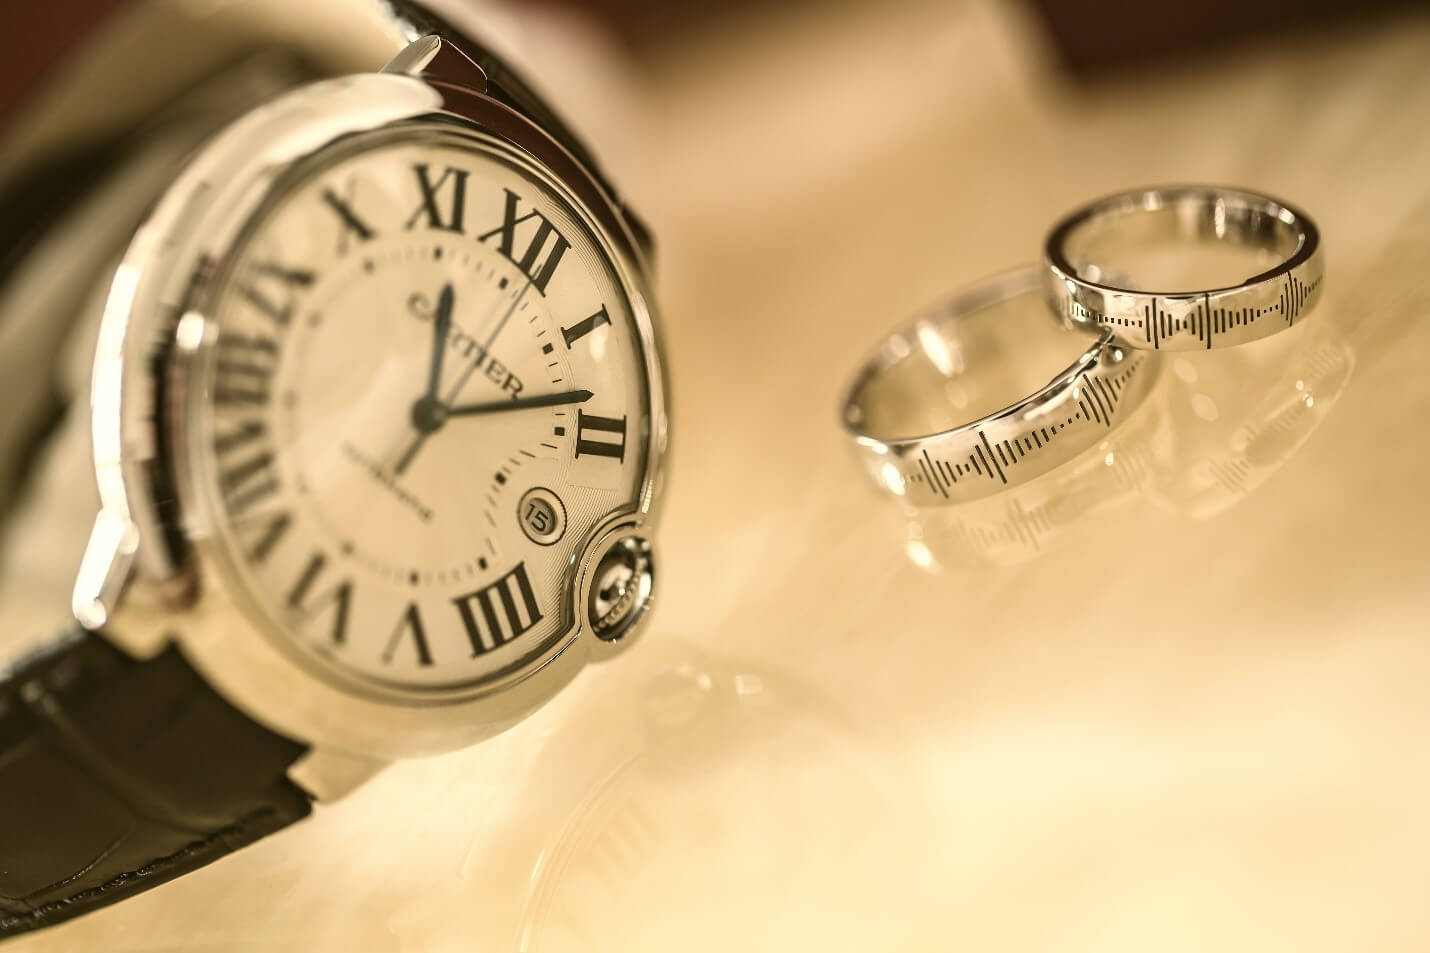 3 Cartier Timepiece Collections Available Today at Albert's Diamond Jewelers